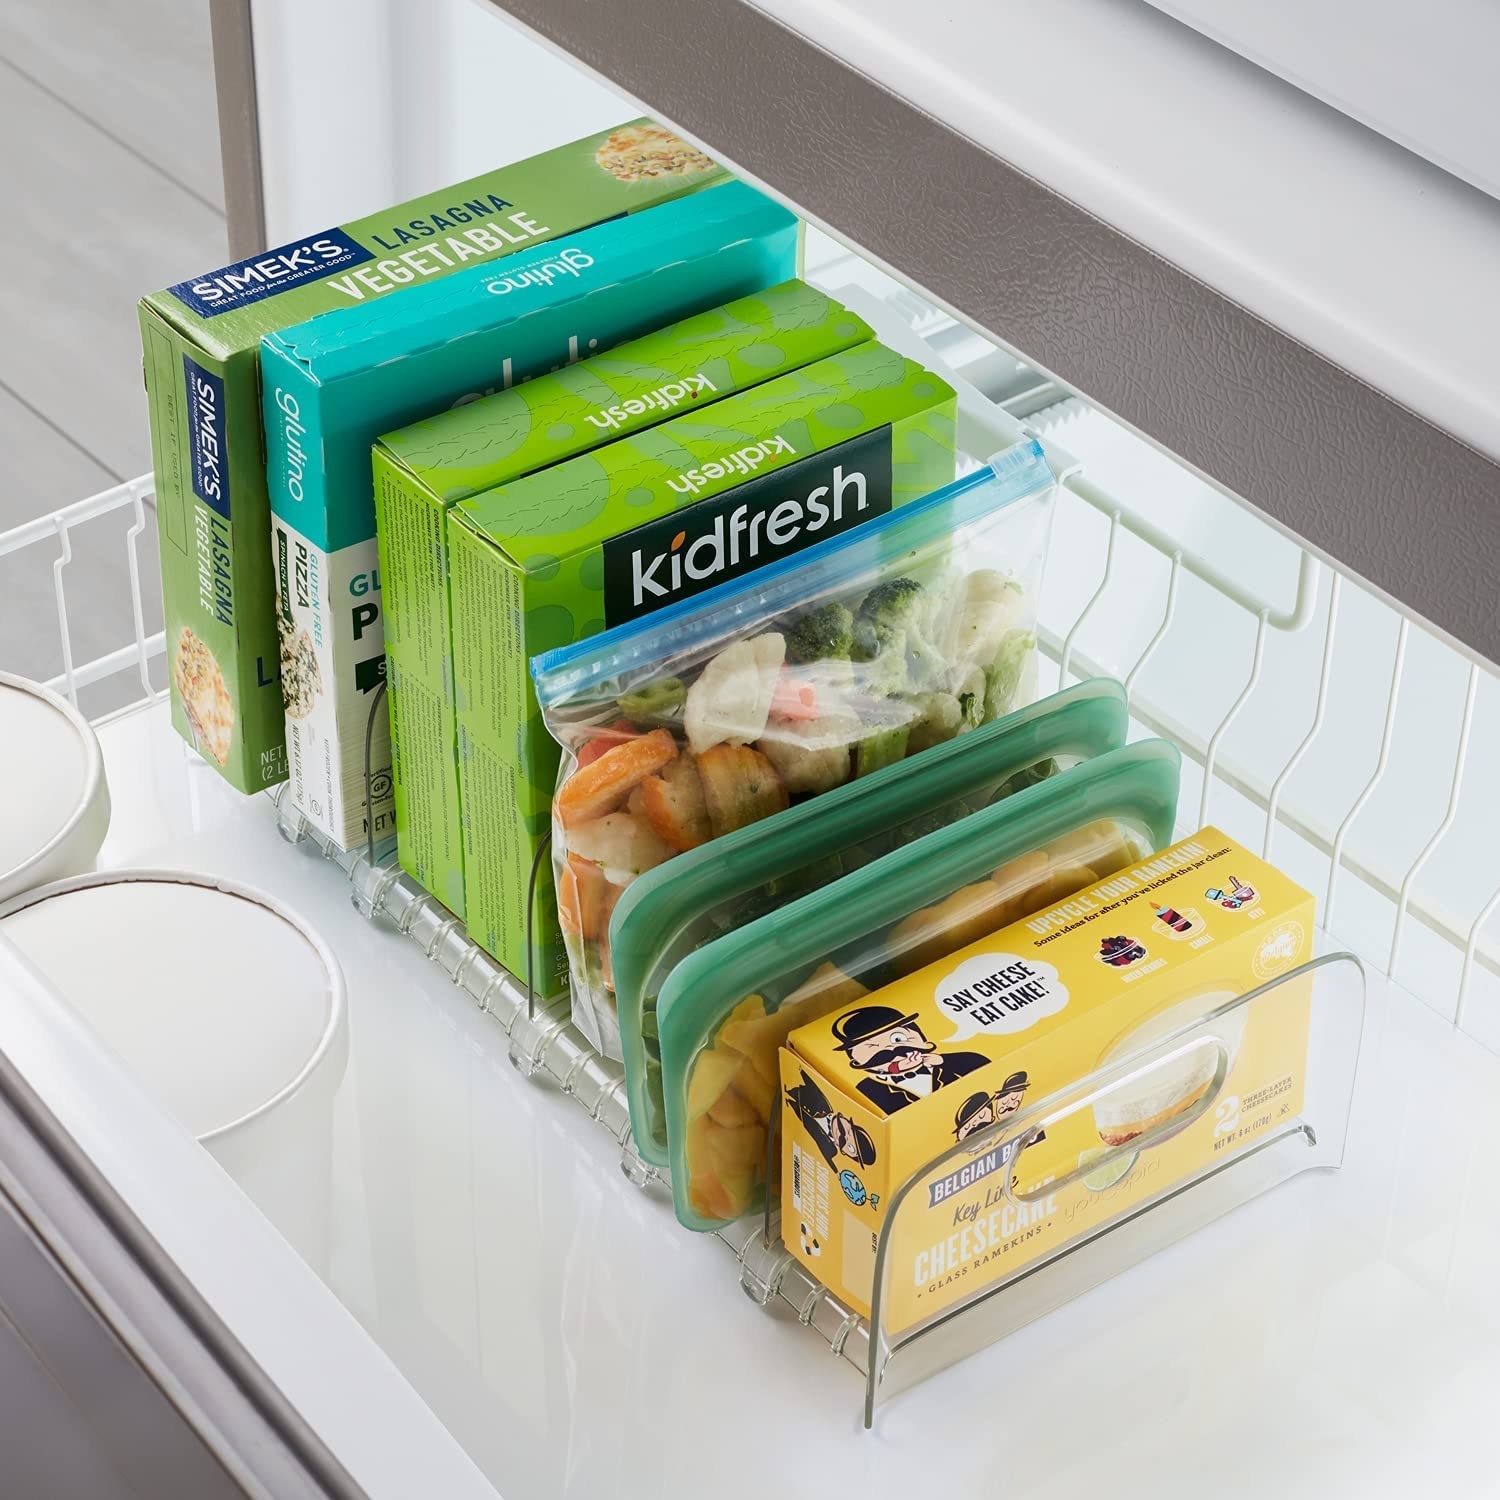 The freezer organizer with boxes and bags of food in it